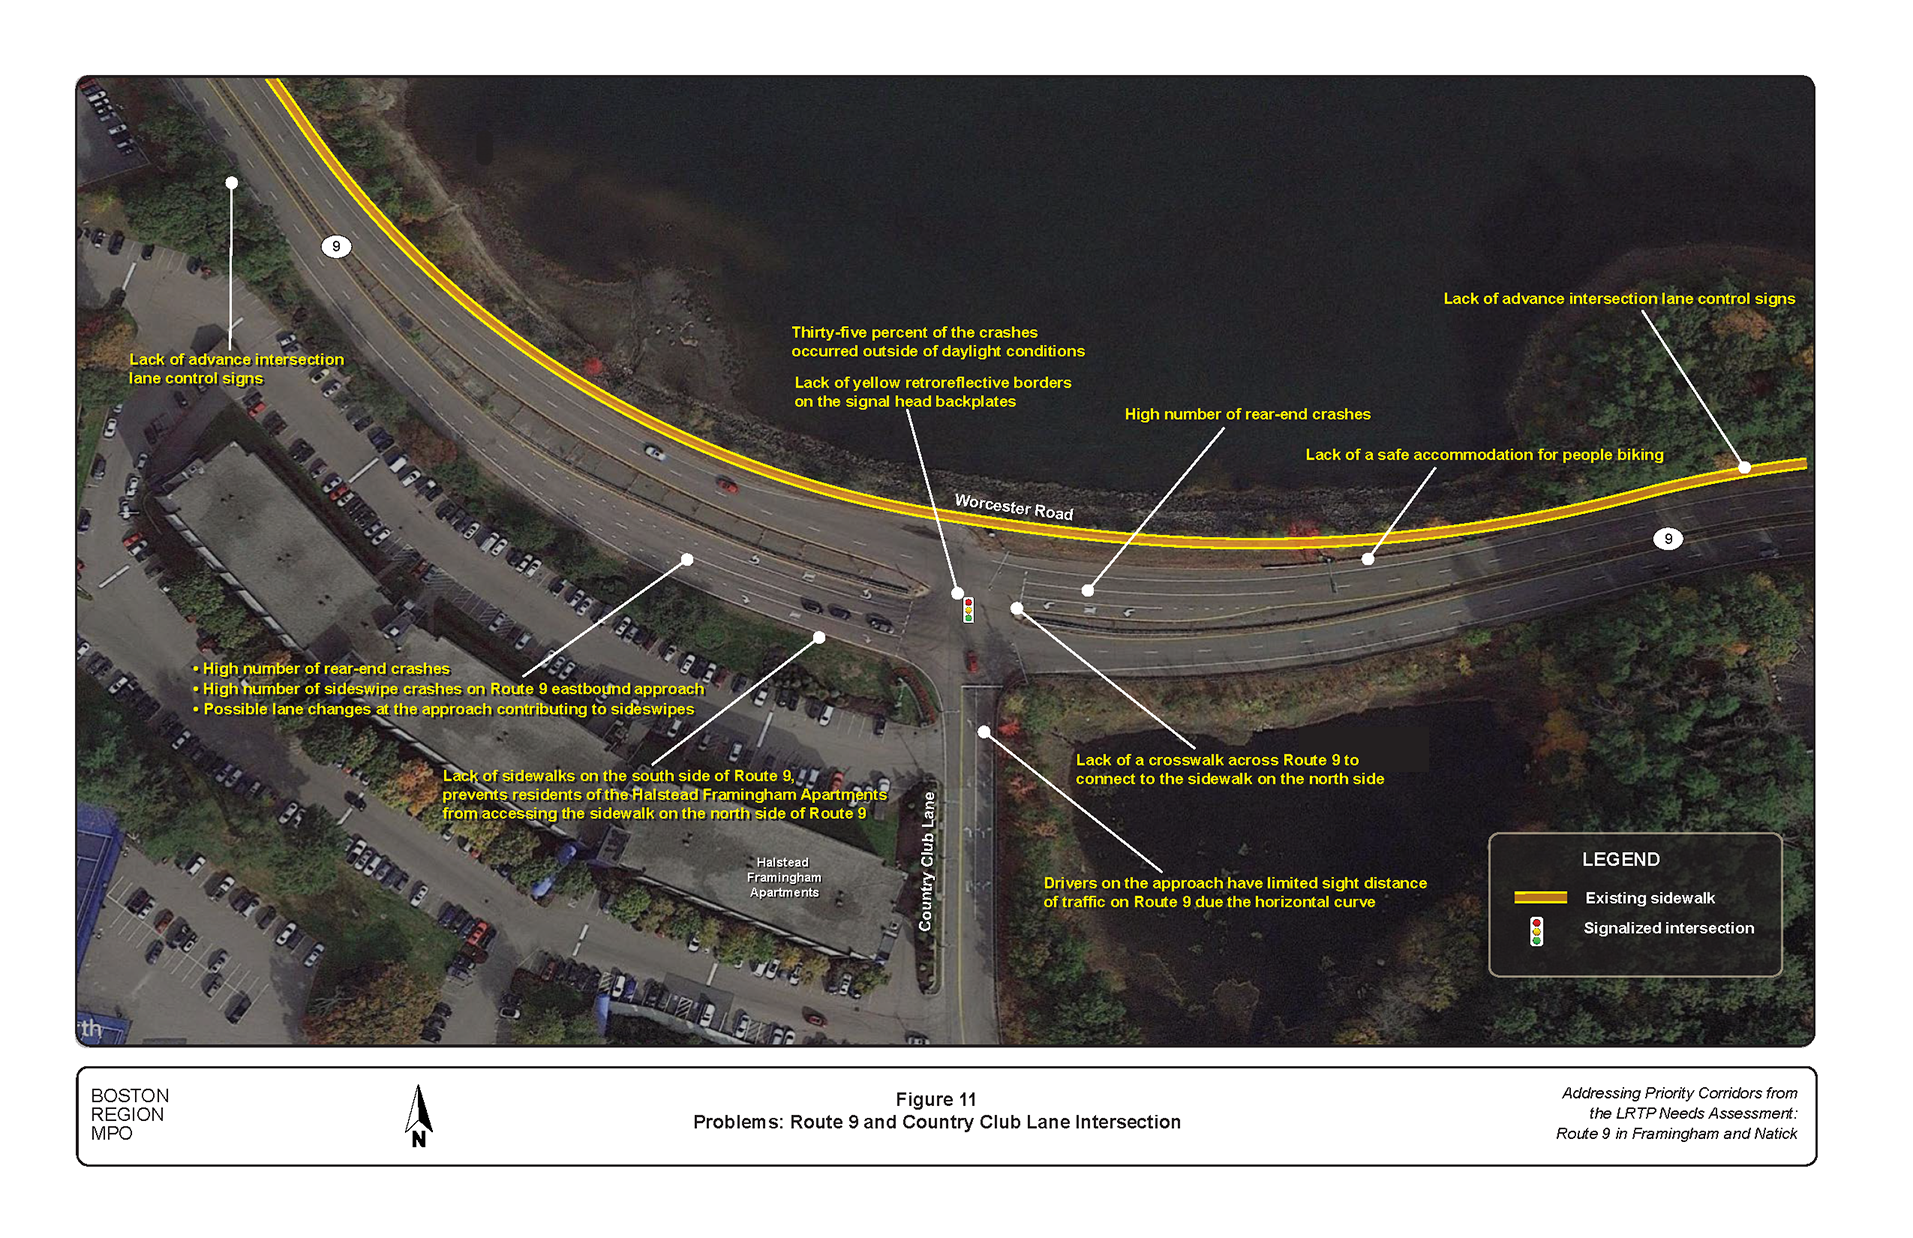 Figure 11 is an aerial photo showing the intersection of Route 9 and Country Club Lane and the problems